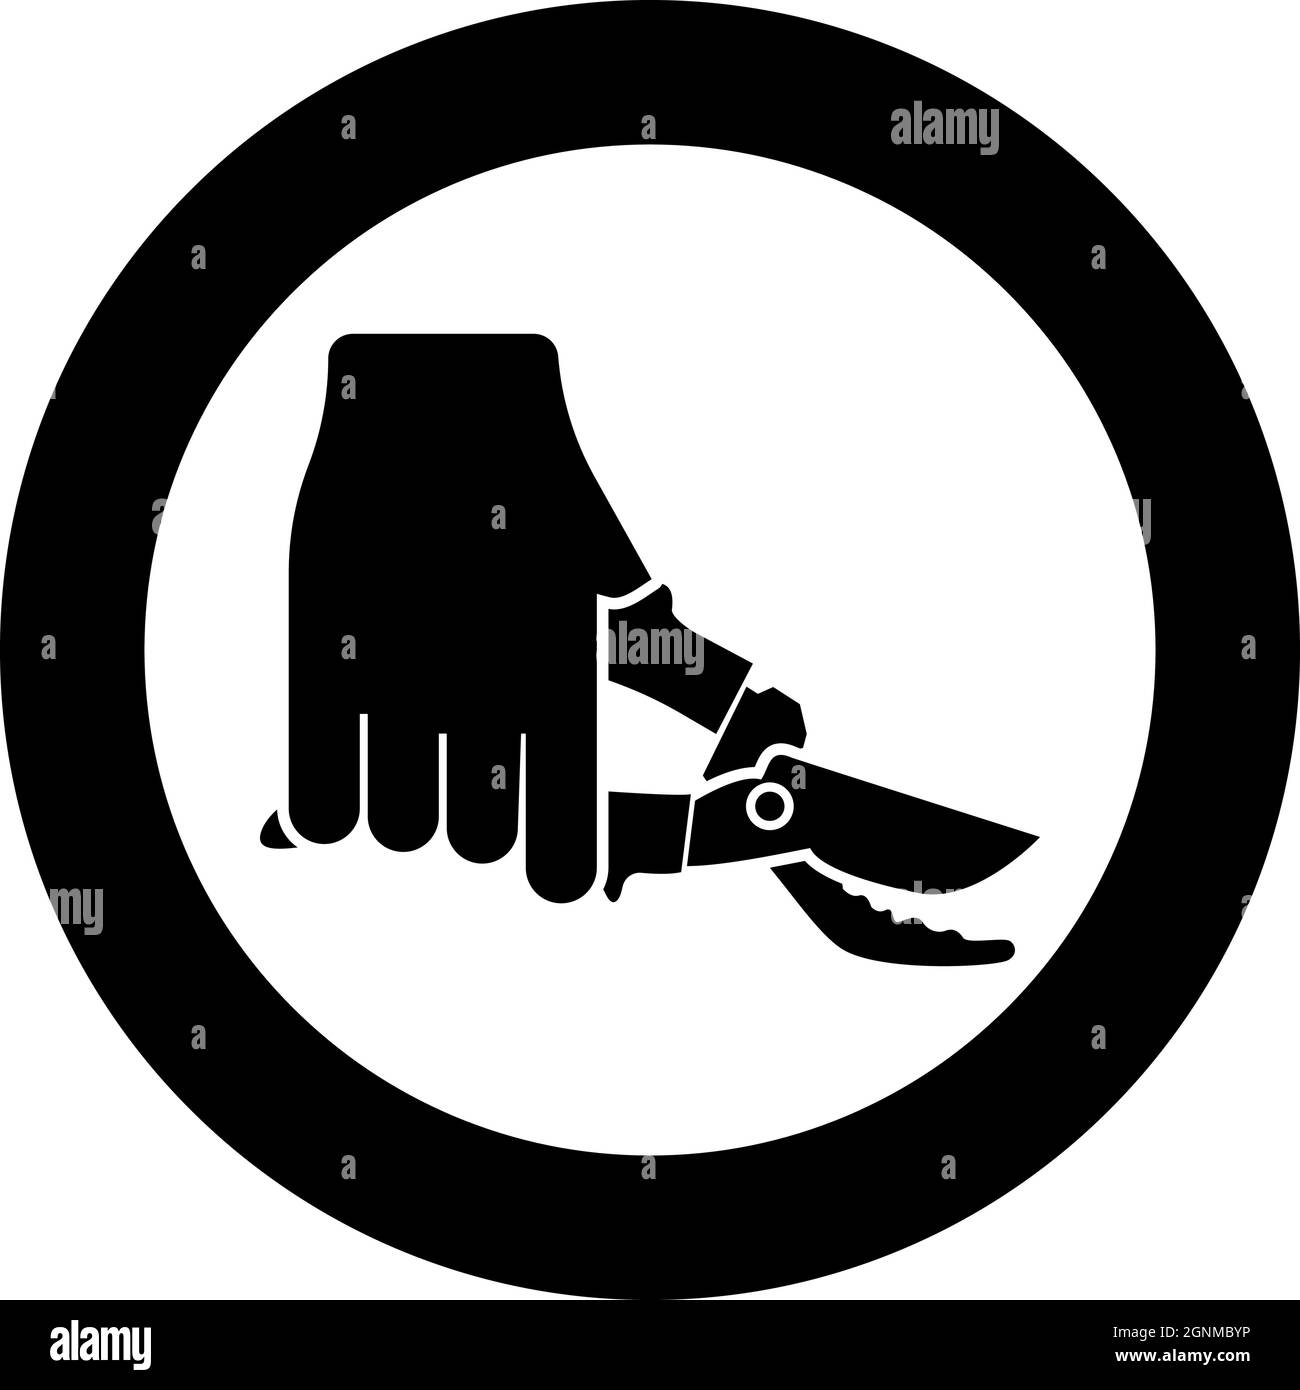 Secateur in hand garden pruner pruning shears Clippers Hand scissors Manual cutting use tool icon in circle round black color vector illustration Stock Vector